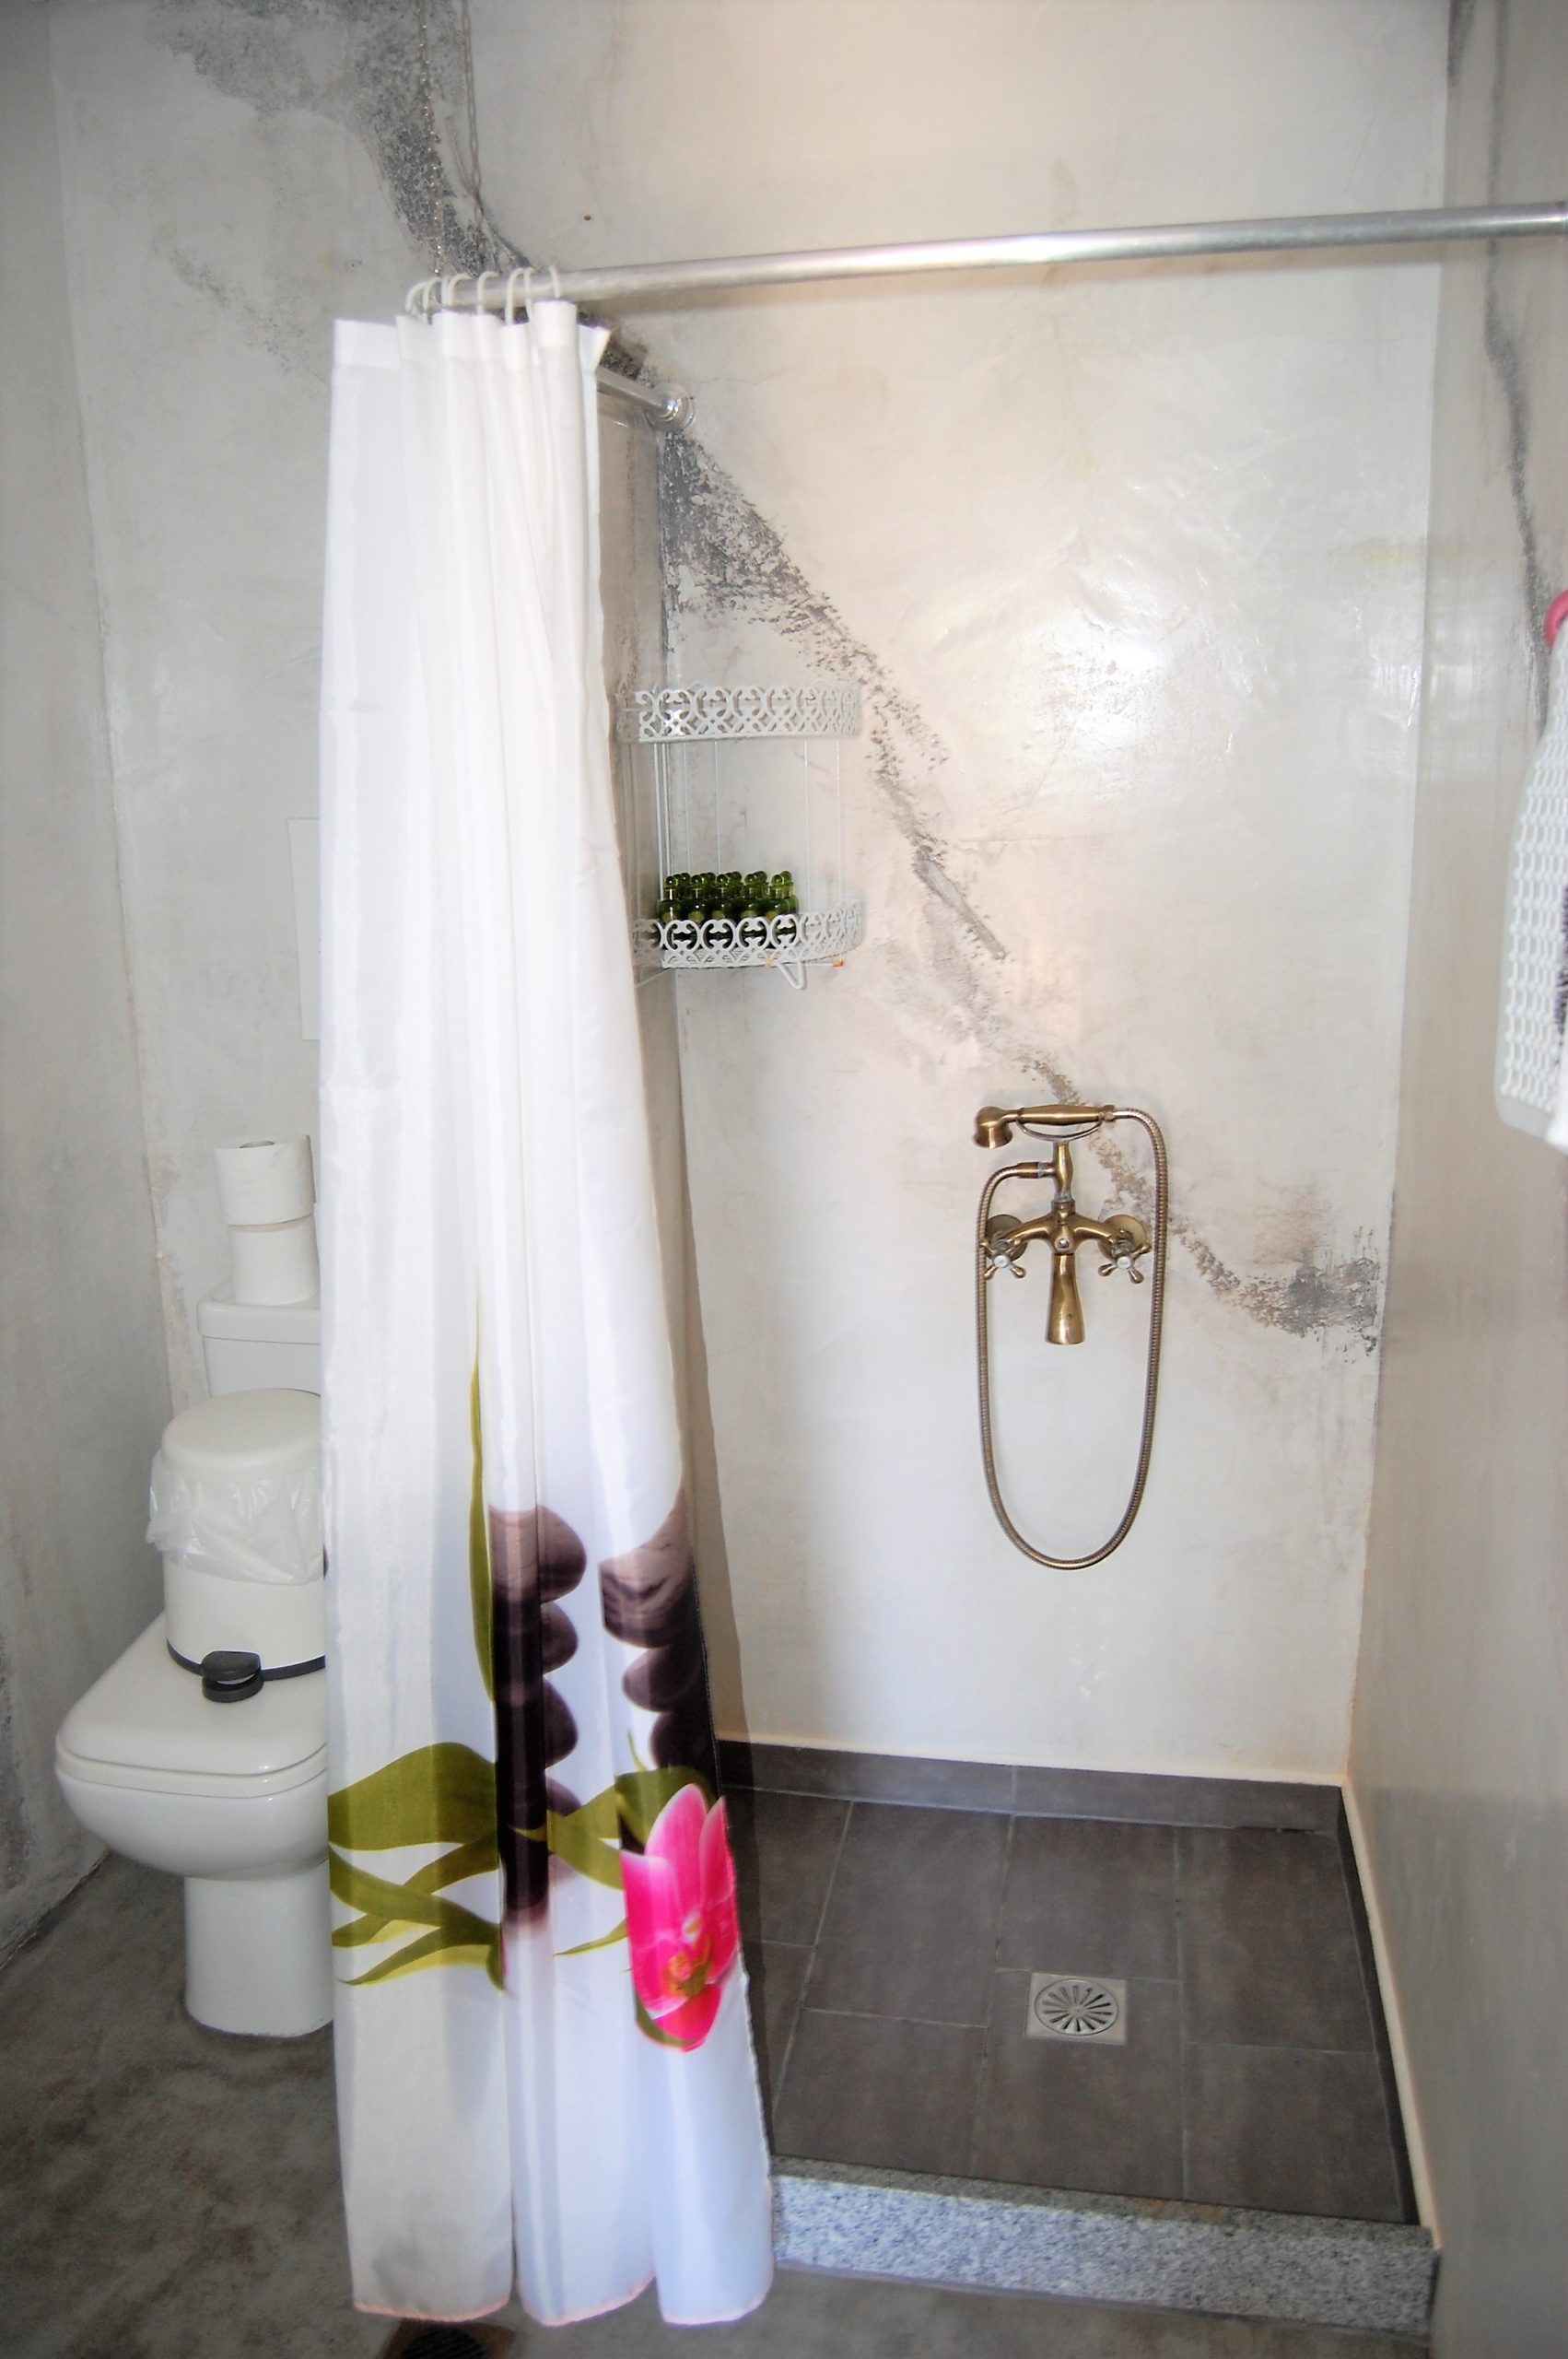 Bathroom of Bay View house for rent in Vathi